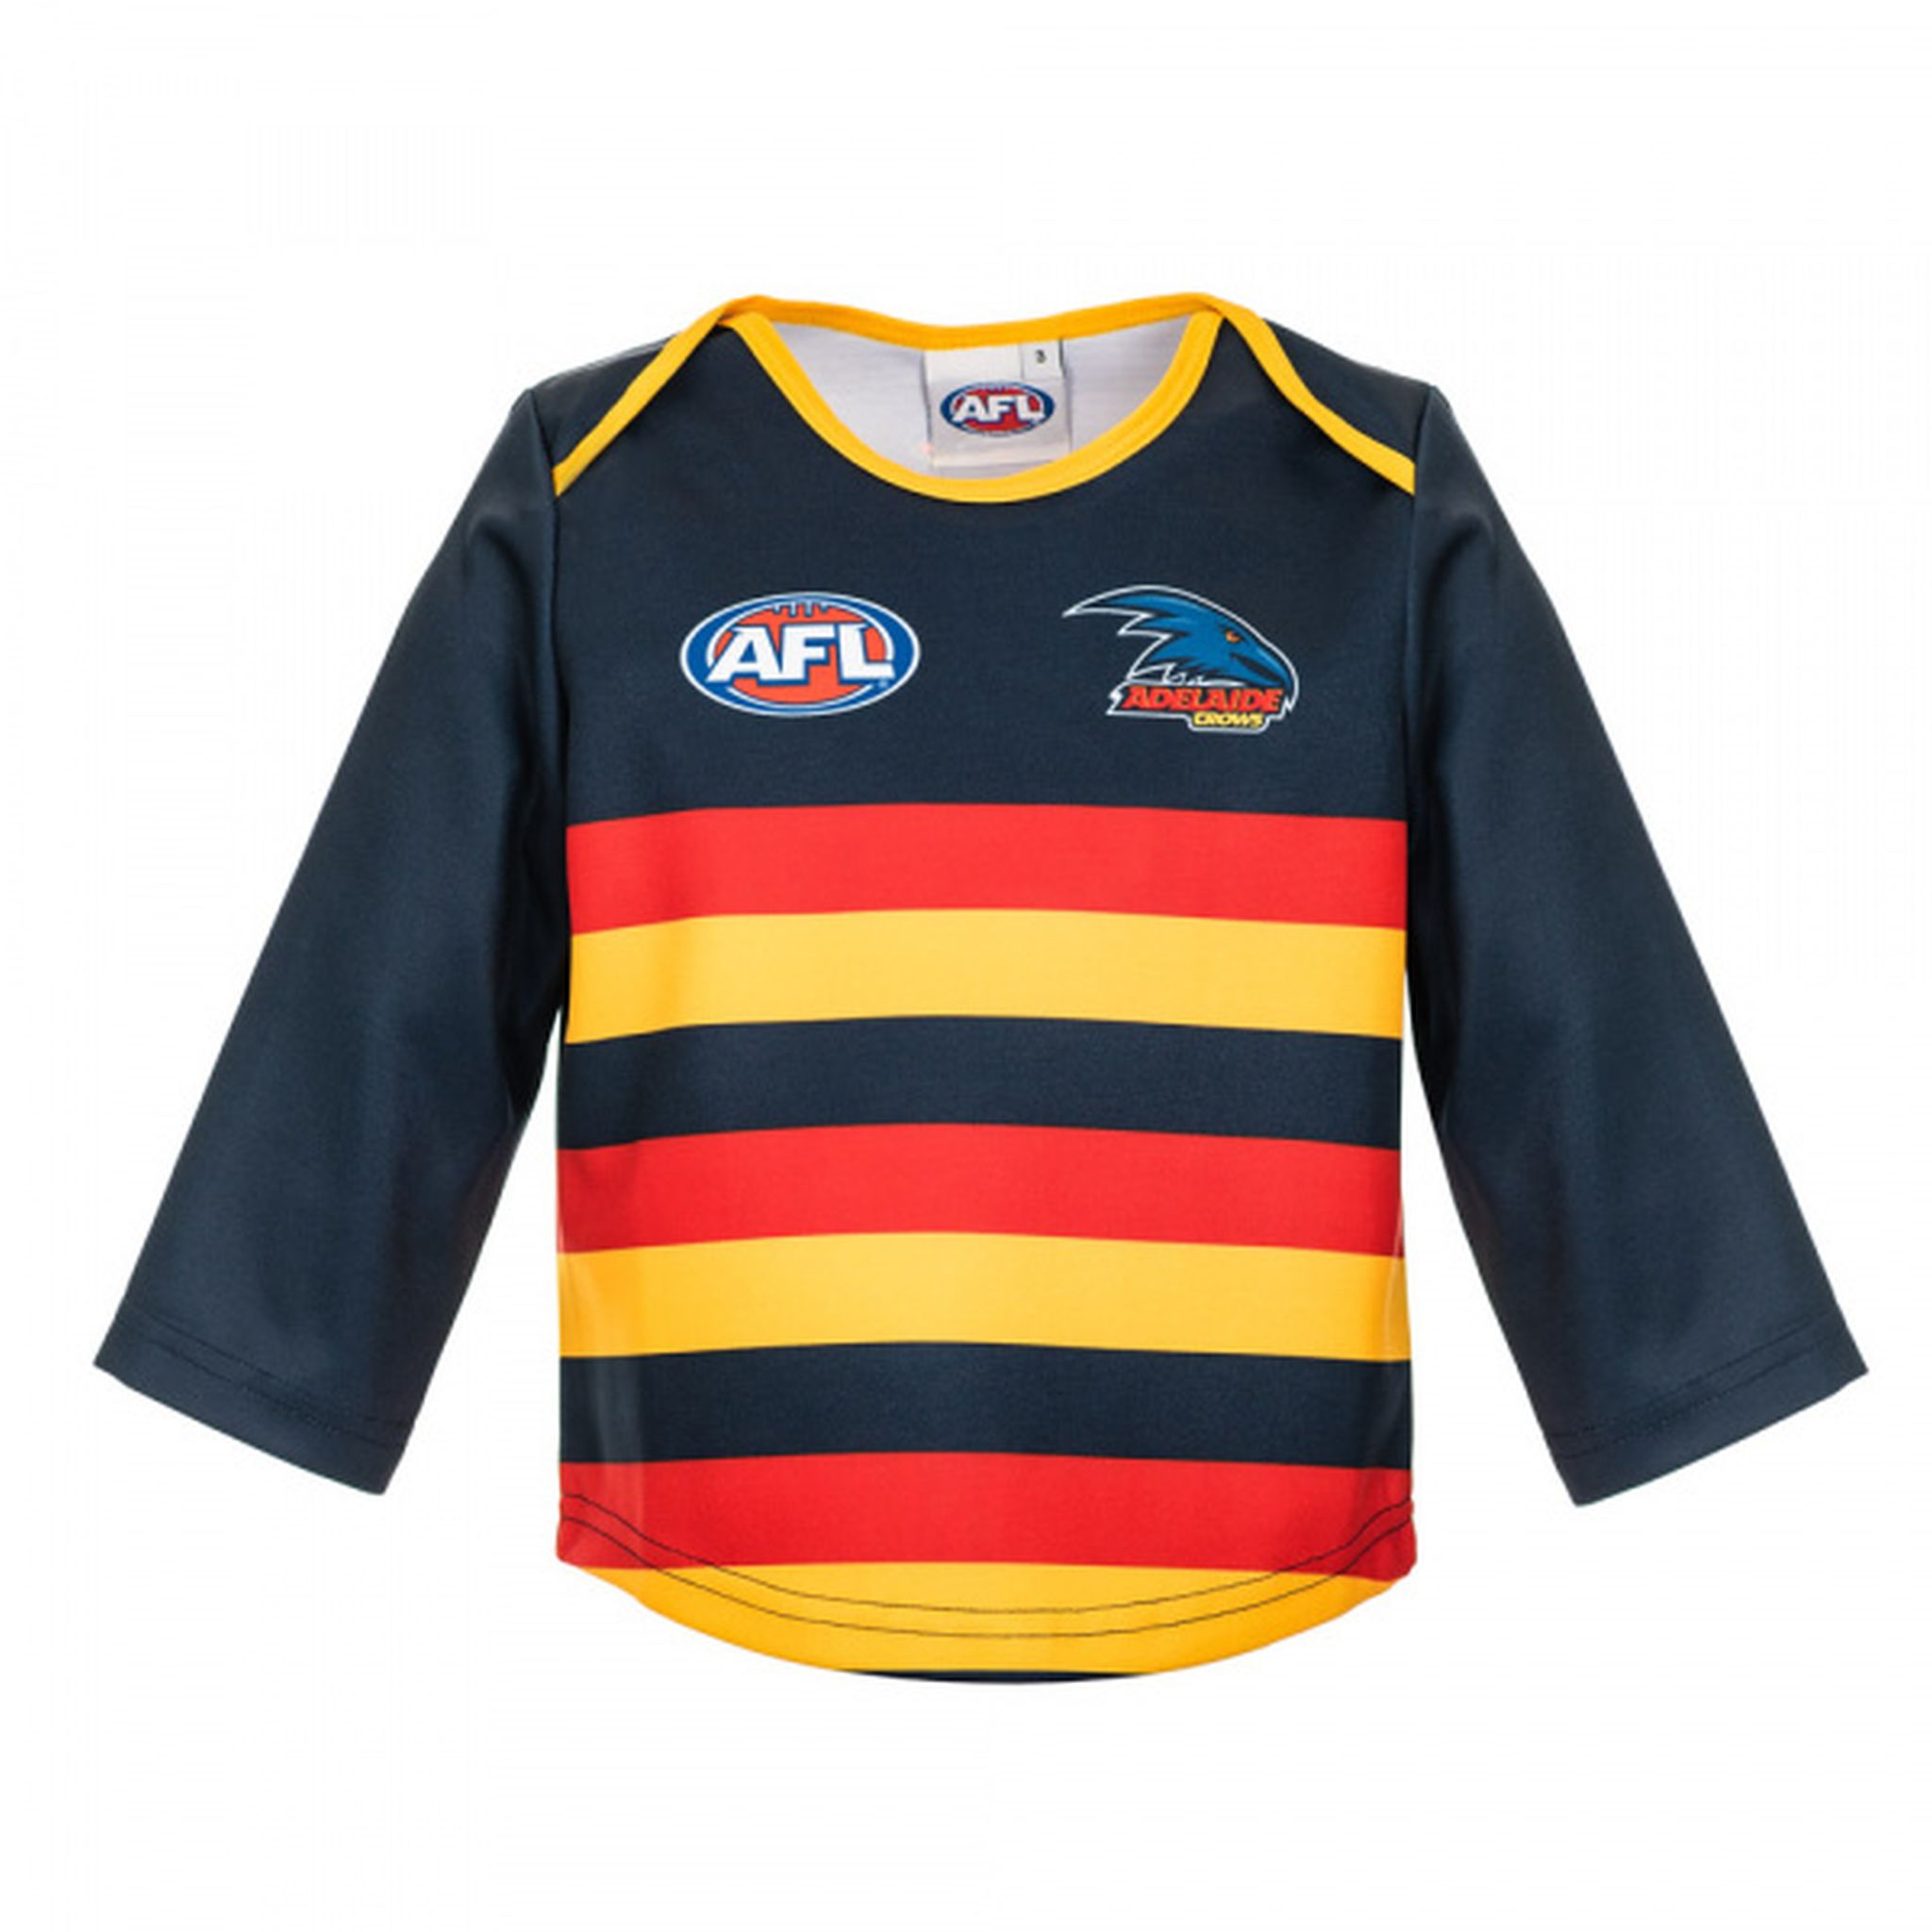 Burley Adelaide Crows AFL Infant Long Sleeve Replica Guernsey - (SIZE 2)